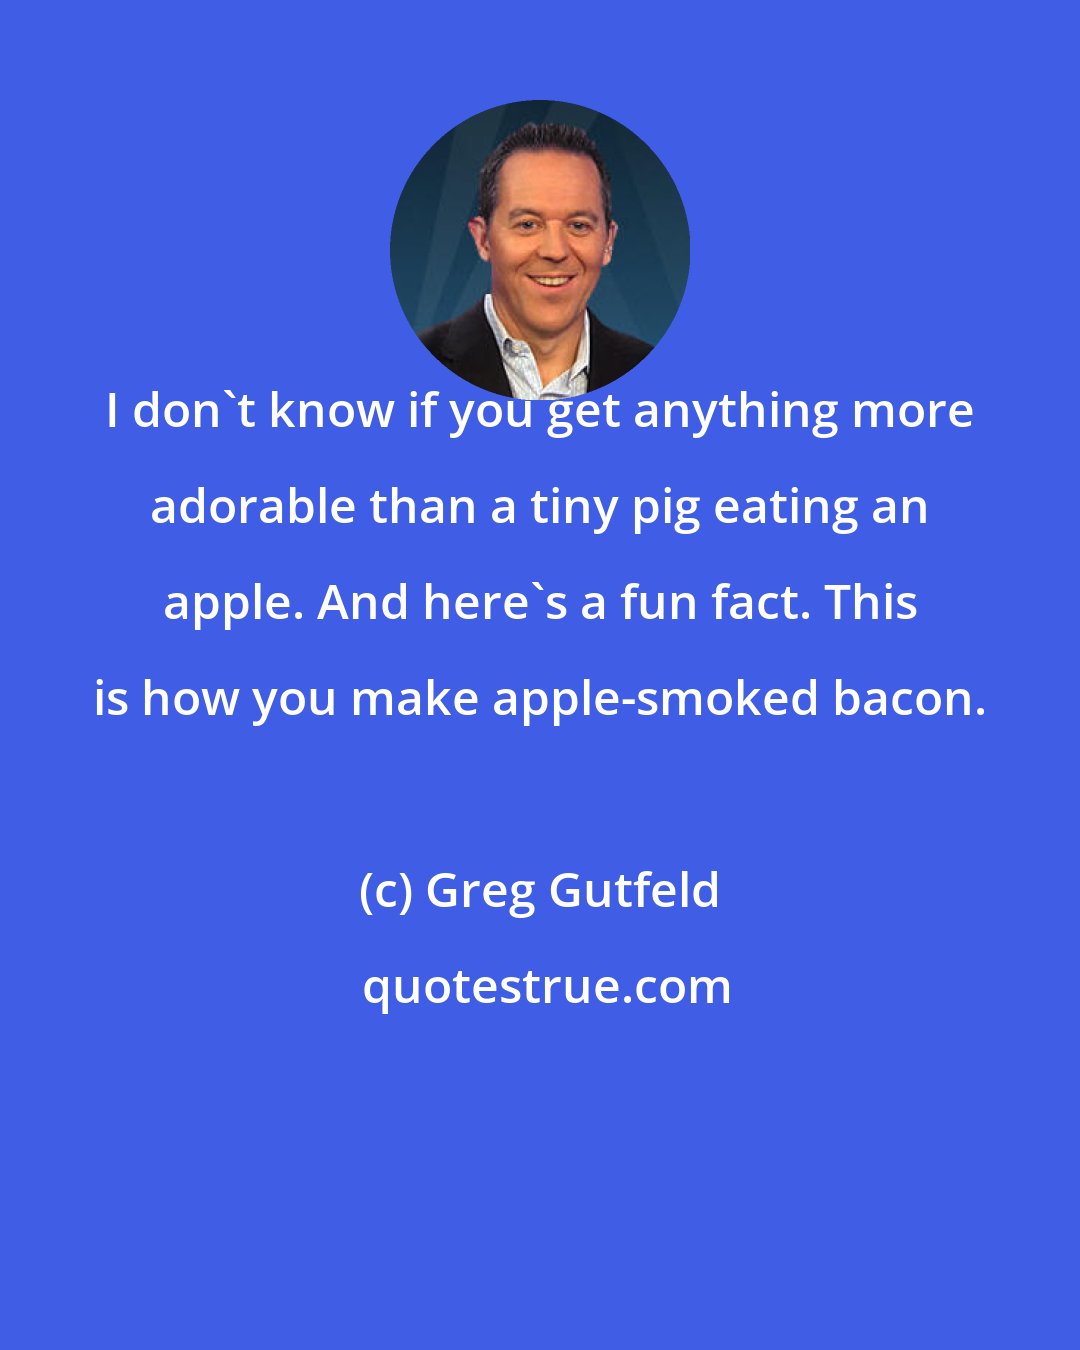 Greg Gutfeld: I don't know if you get anything more adorable than a tiny pig eating an apple. And here's a fun fact. This is how you make apple-smoked bacon.